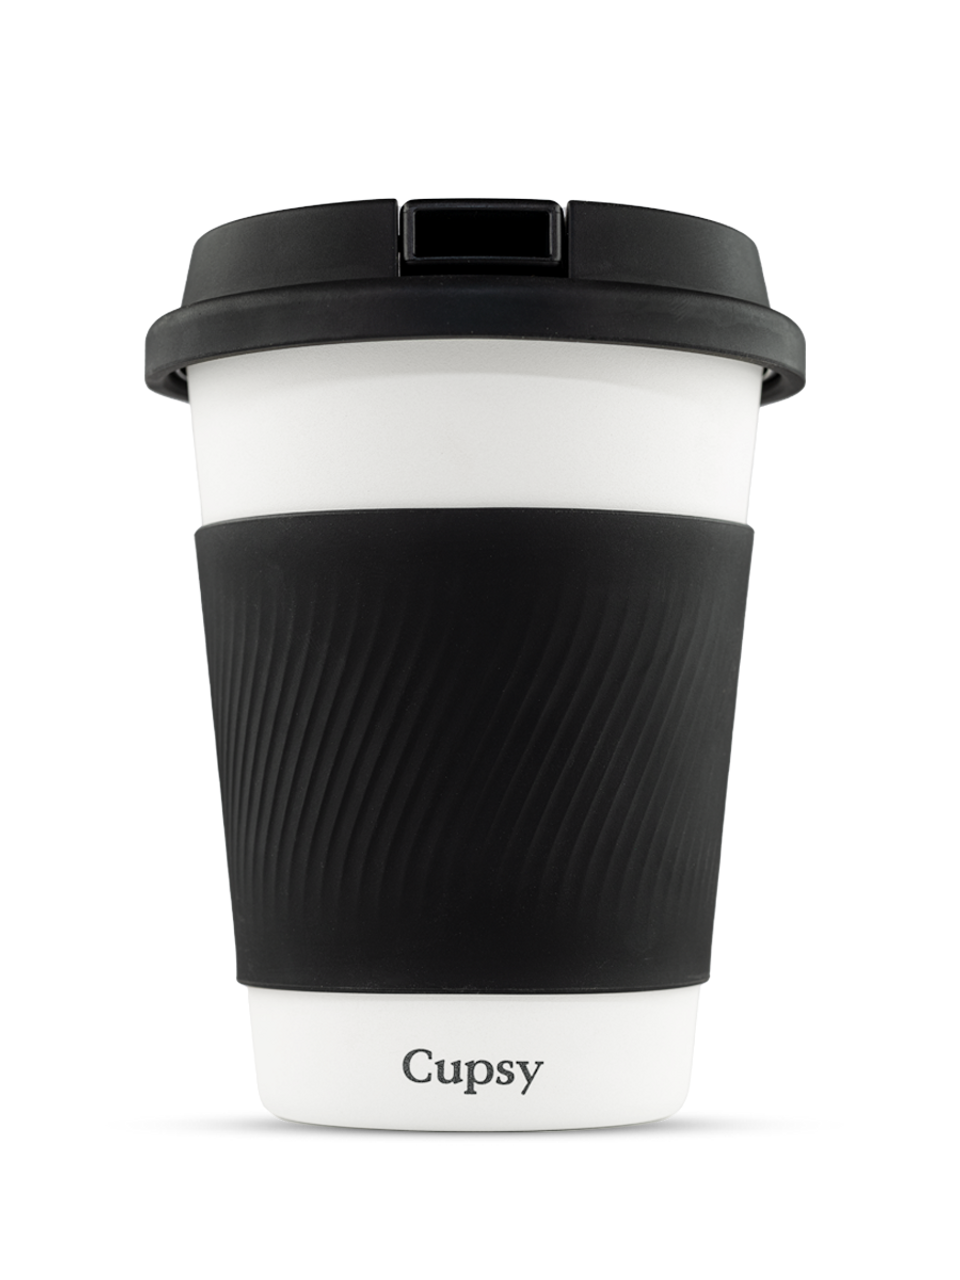 Puffco Cupsy Coffee Cup Water Pipe - Front View - Discreet Mug Design